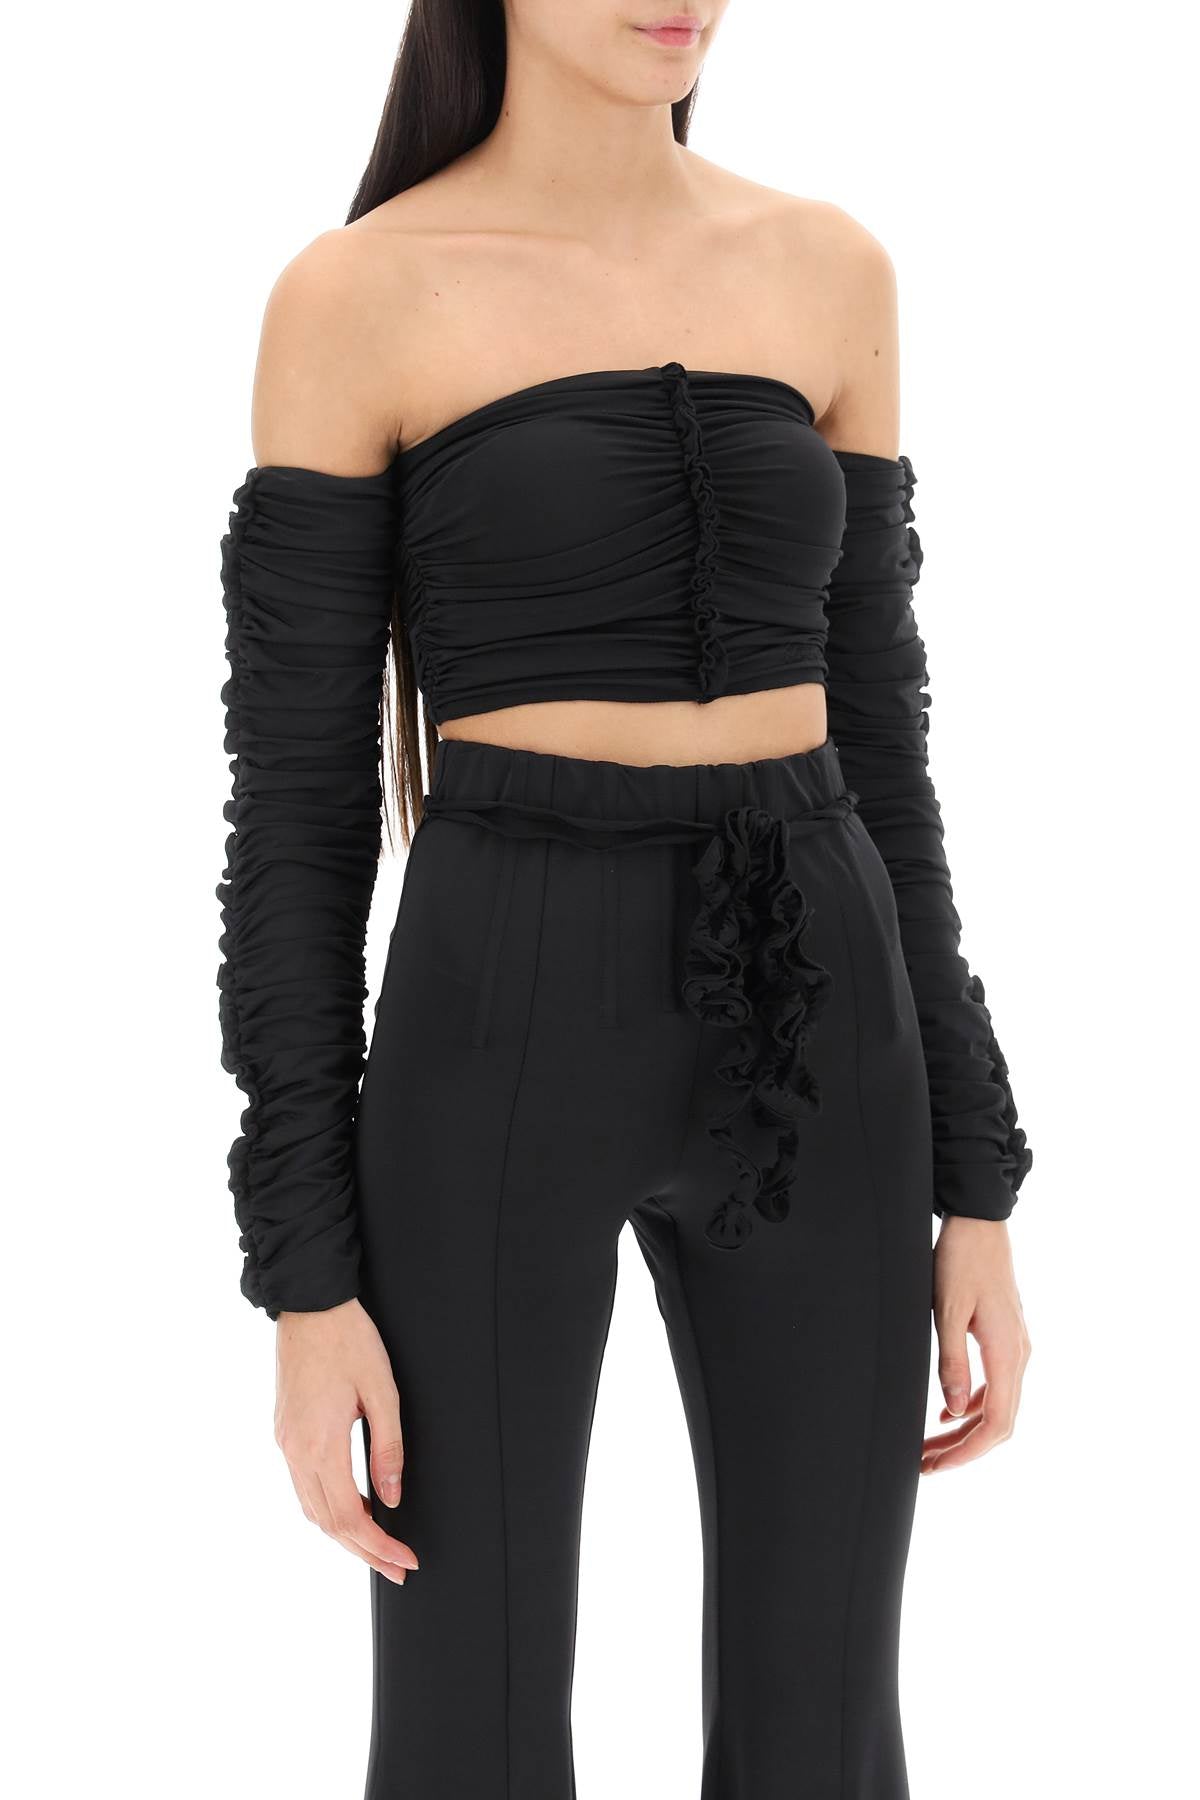 Rotate ruched off-shoulder cropped top-women > clothing > tops-Rotate-34-Black-Urbanheer